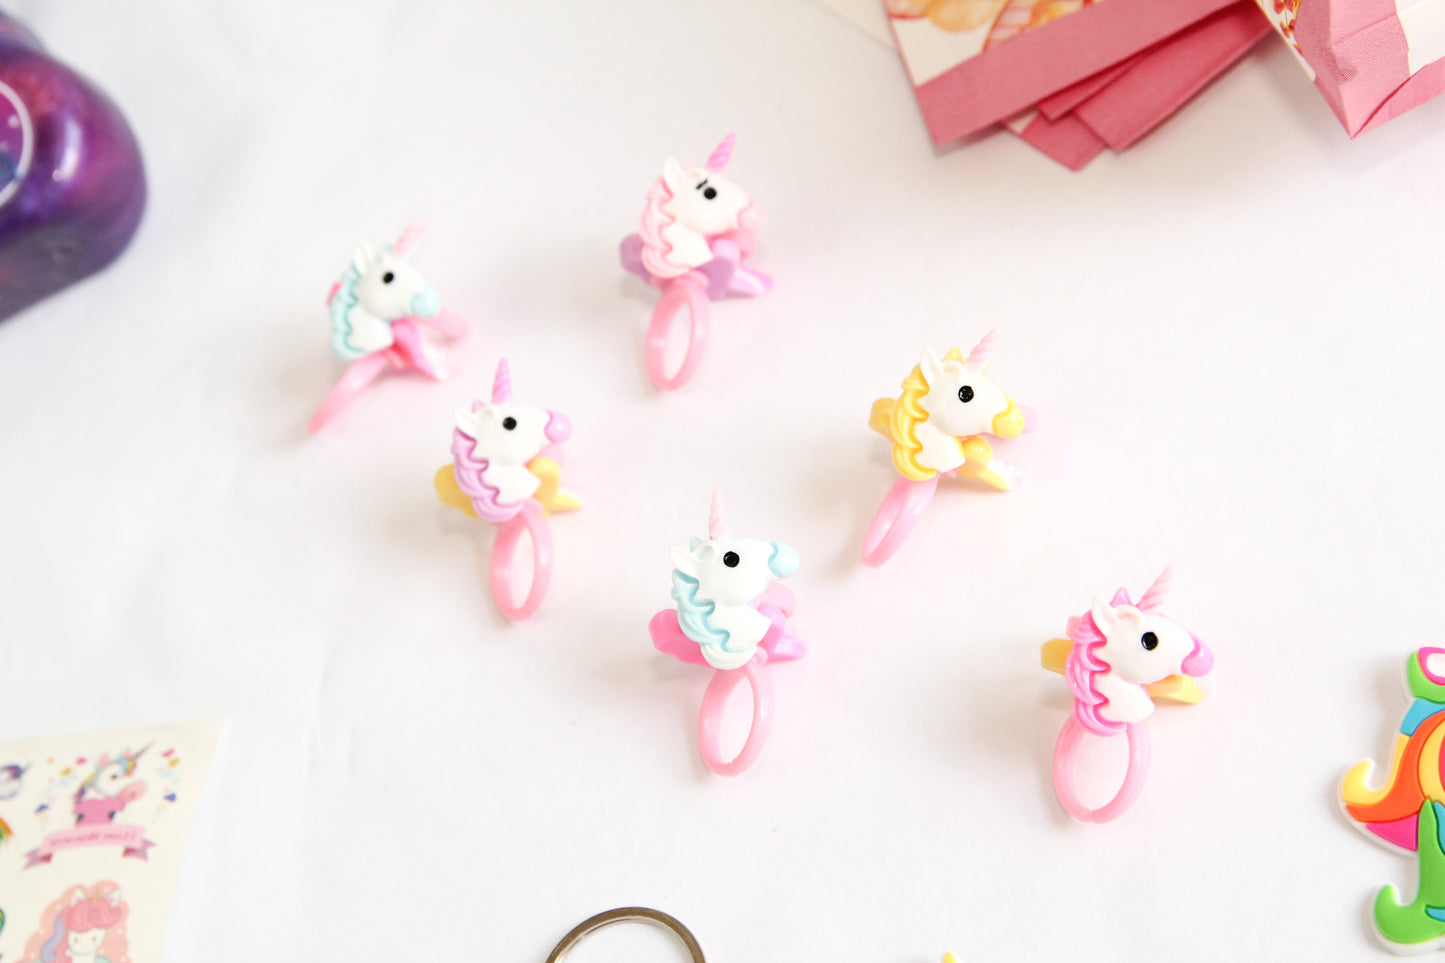 Unicorn Party Favors for Kids Bundle (12 of Each Item) Slime, Bags, Rings, Tattoo & Keychains